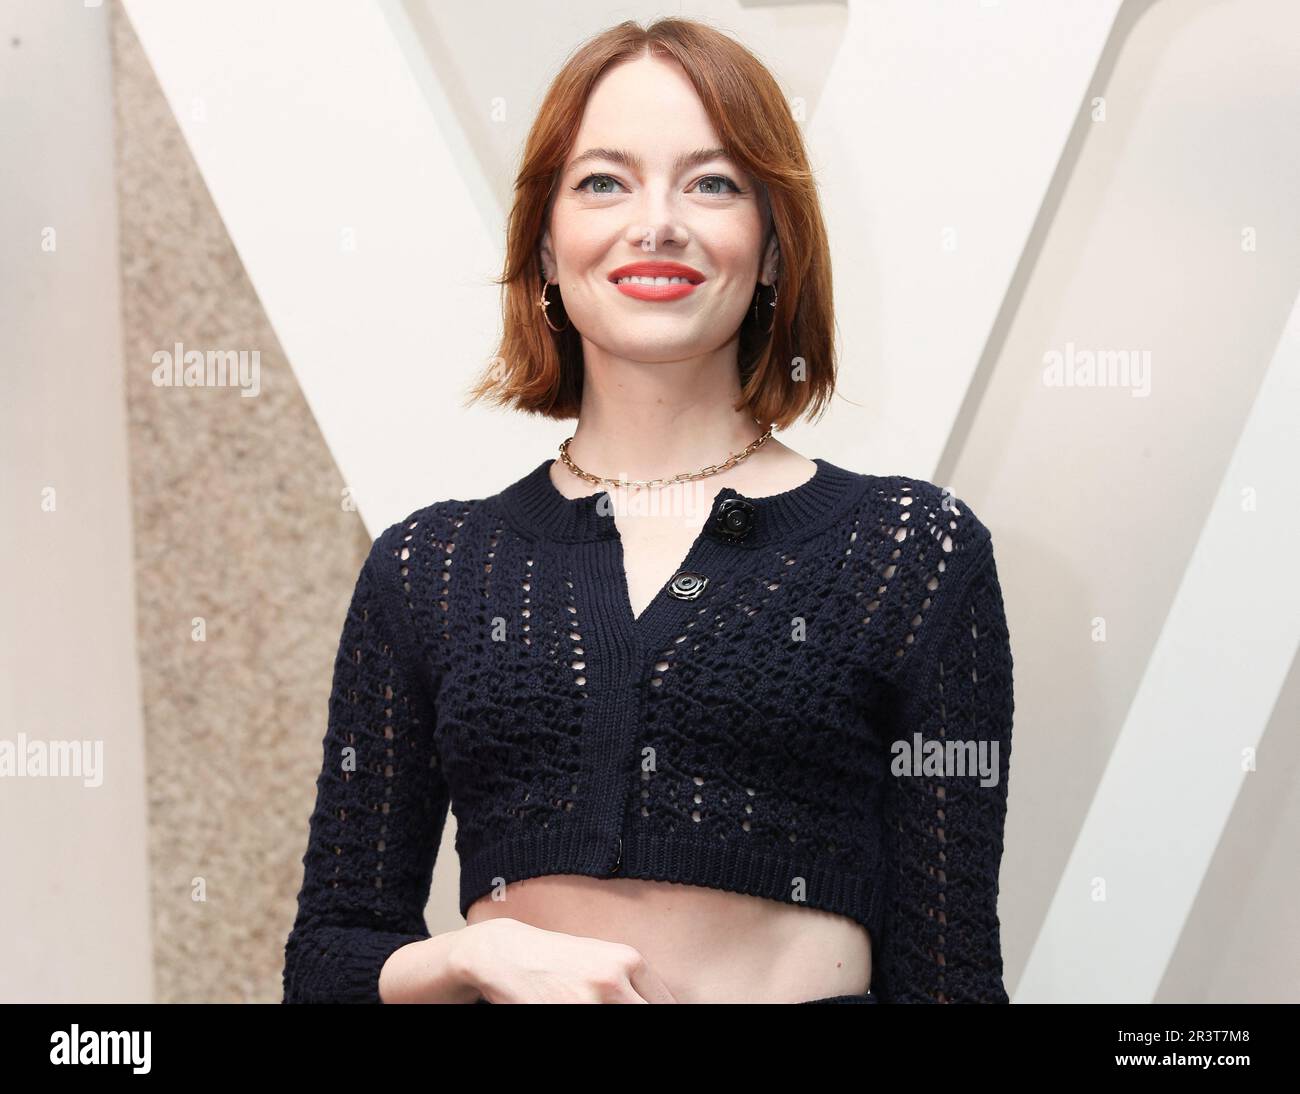 Emma Stone attends the Louis Vuitton Cruise Collection fashion show, held  at the Fondation Maeght in Saint-Paul-de-Vence, south of France, on May 28,  2018. Photo by Marco Piovanotto/ABACAPRESS.COM Stock Photo - Alamy